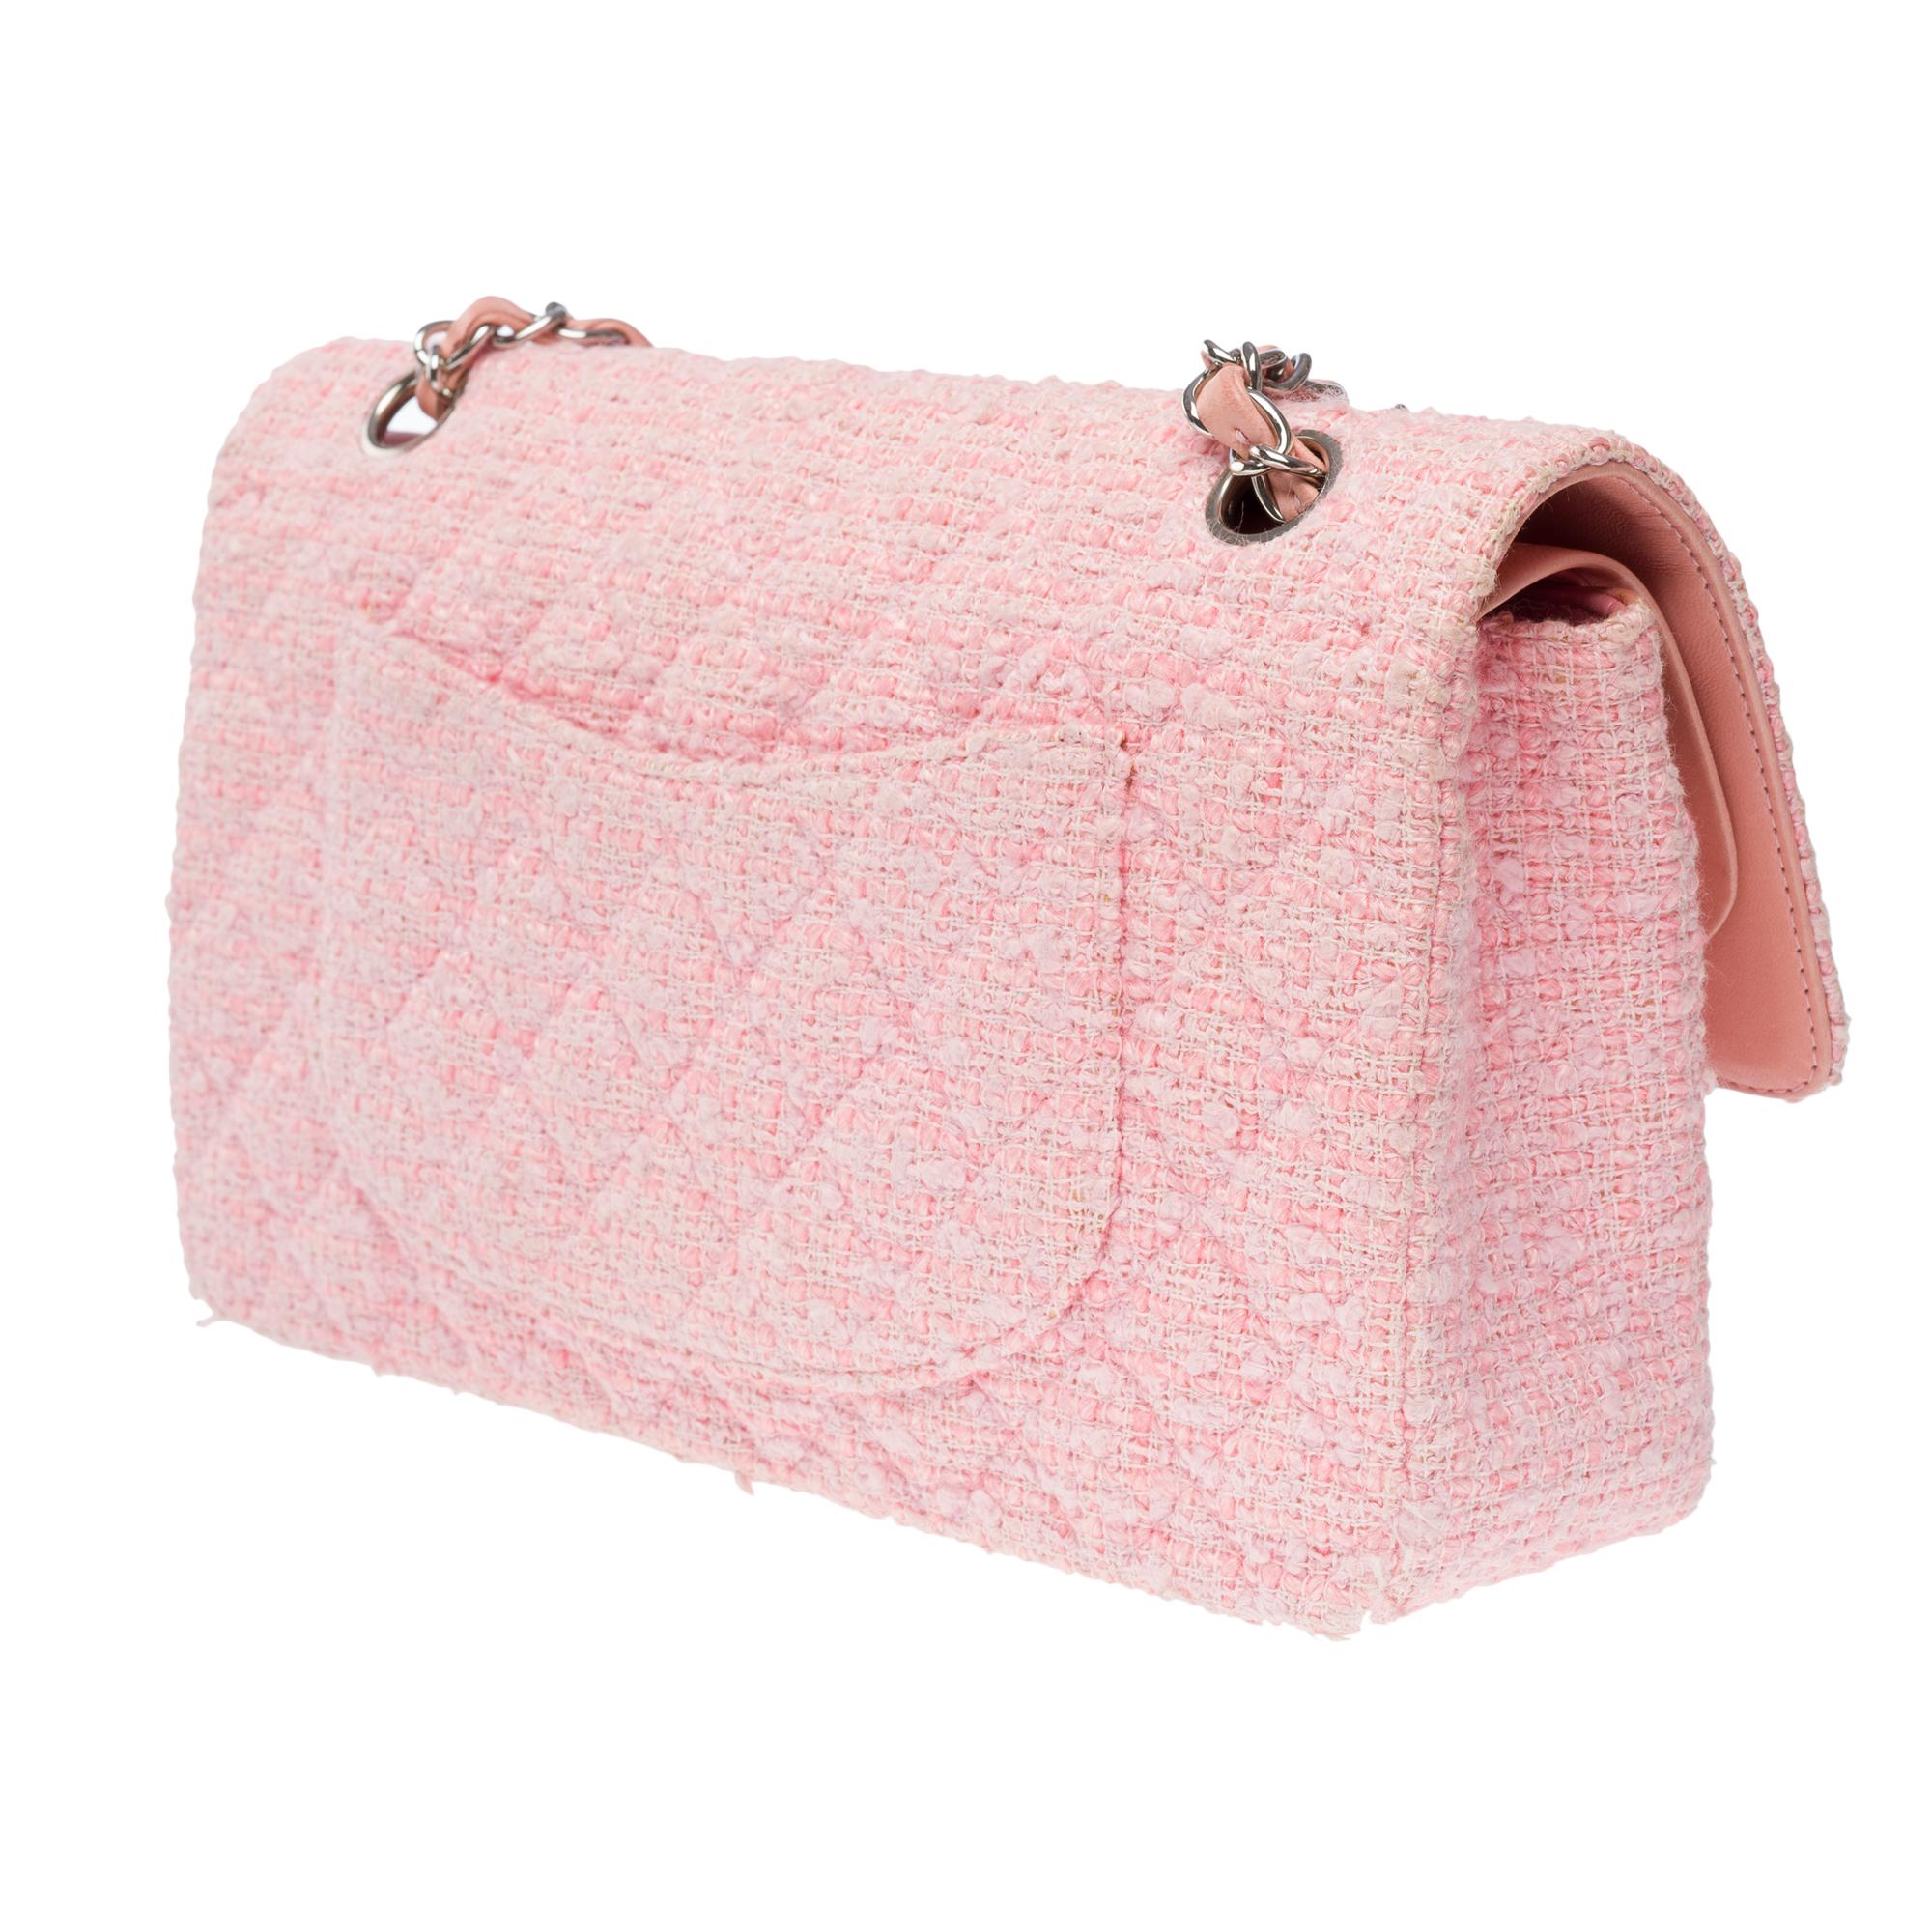 Amazing Chanel Timeless double flap shoulder bag in Pink Quilted Tweed, SHW 2